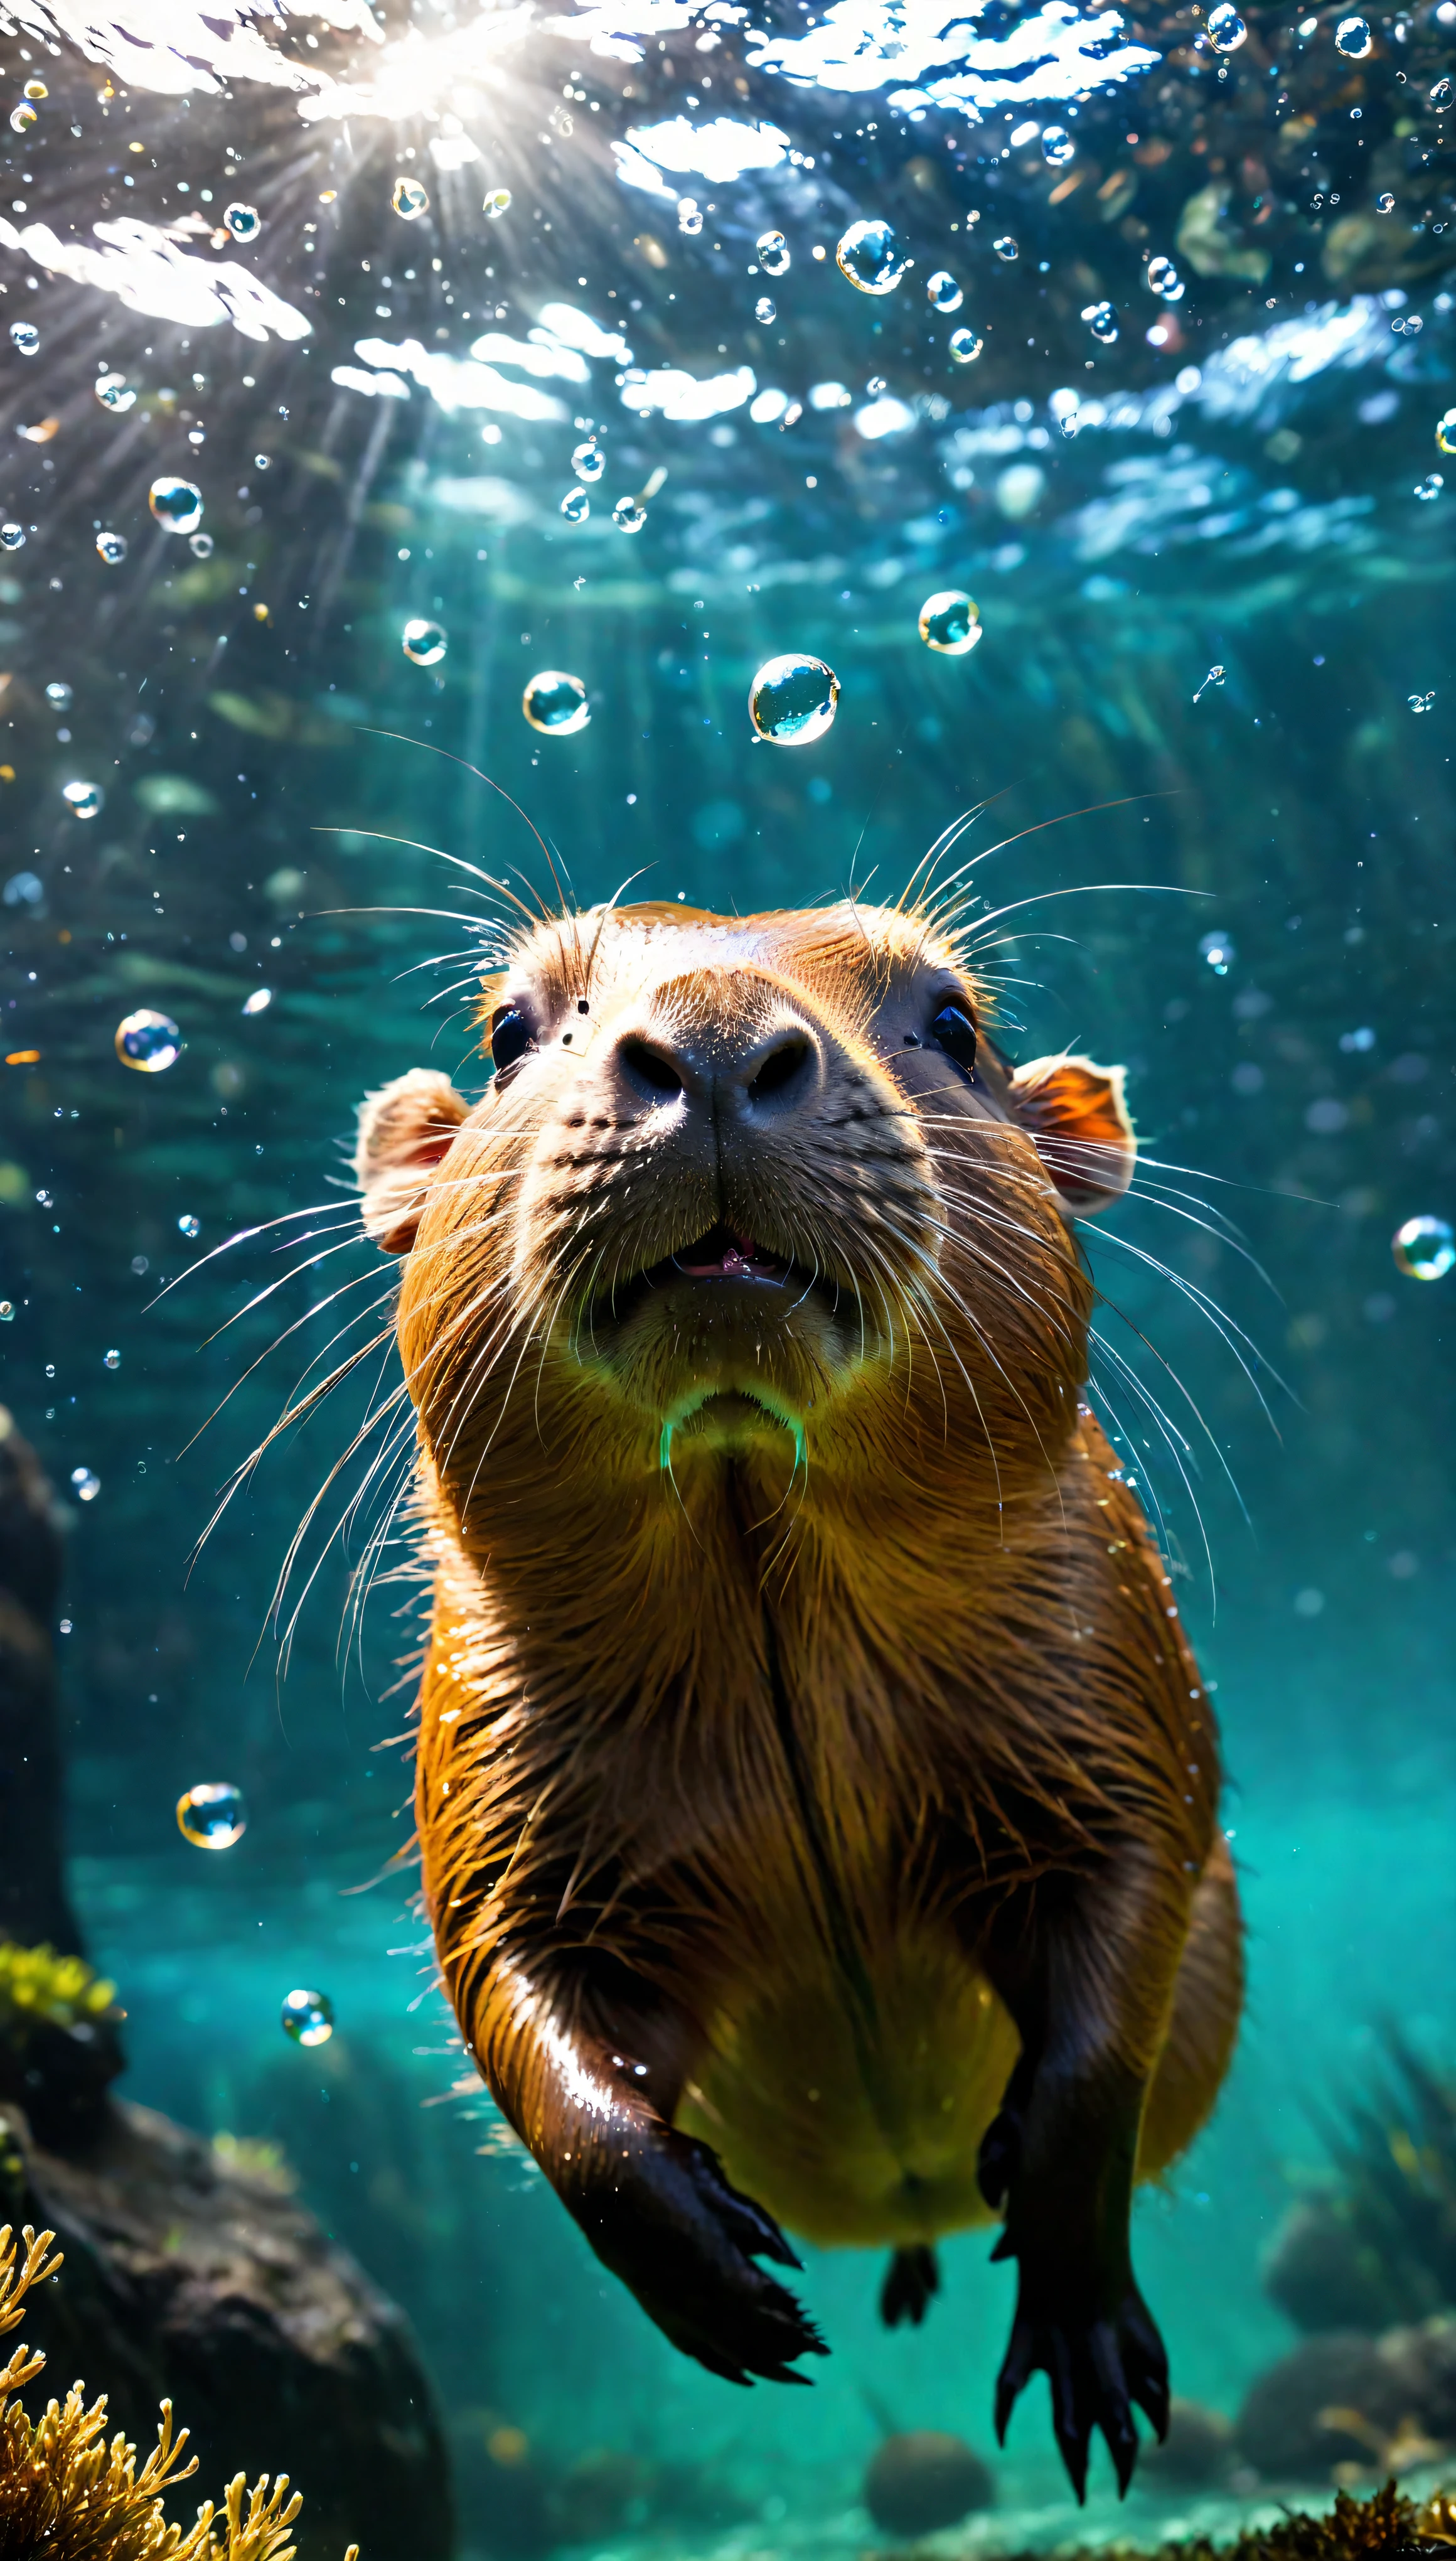 ((Masterpiece in maximum 16K resolution):1.6),((soft_color_photograpy:)1.5), ((Ultra-Detailed):1.4),((Movie-like still images and dynamic angles):1.3). | (Macro shot cinematic photo of exotic Capybara underwater), (a Capybara swimming underwater), (water bubbles), (macro lens), (exotic animal), (cute), (delightful atmosphere), (aesthetic photography style), (visual experience),(Realism), (Realistic),award-winning graphics, dark shot, film grain, extremely detailed, Digital Art, rtx, Unreal Engine, scene concept anti glare effect, All captured with sharp focus. | Rendered in ultra-high definition with UHD and retina quality, this masterpiece ensures anatomical correctness and textured skin with super detail. With a focus on high quality and accuracy, this award-winning portrayal captures every nuance in stunning 16k resolution, immersing viewers in its lifelike depiction. | ((perfect_composition, perfect_design, perfect_layout, perfect_detail, ultra_detailed)), ((enhance_all, fix_everything)), More Detail, Enhance.